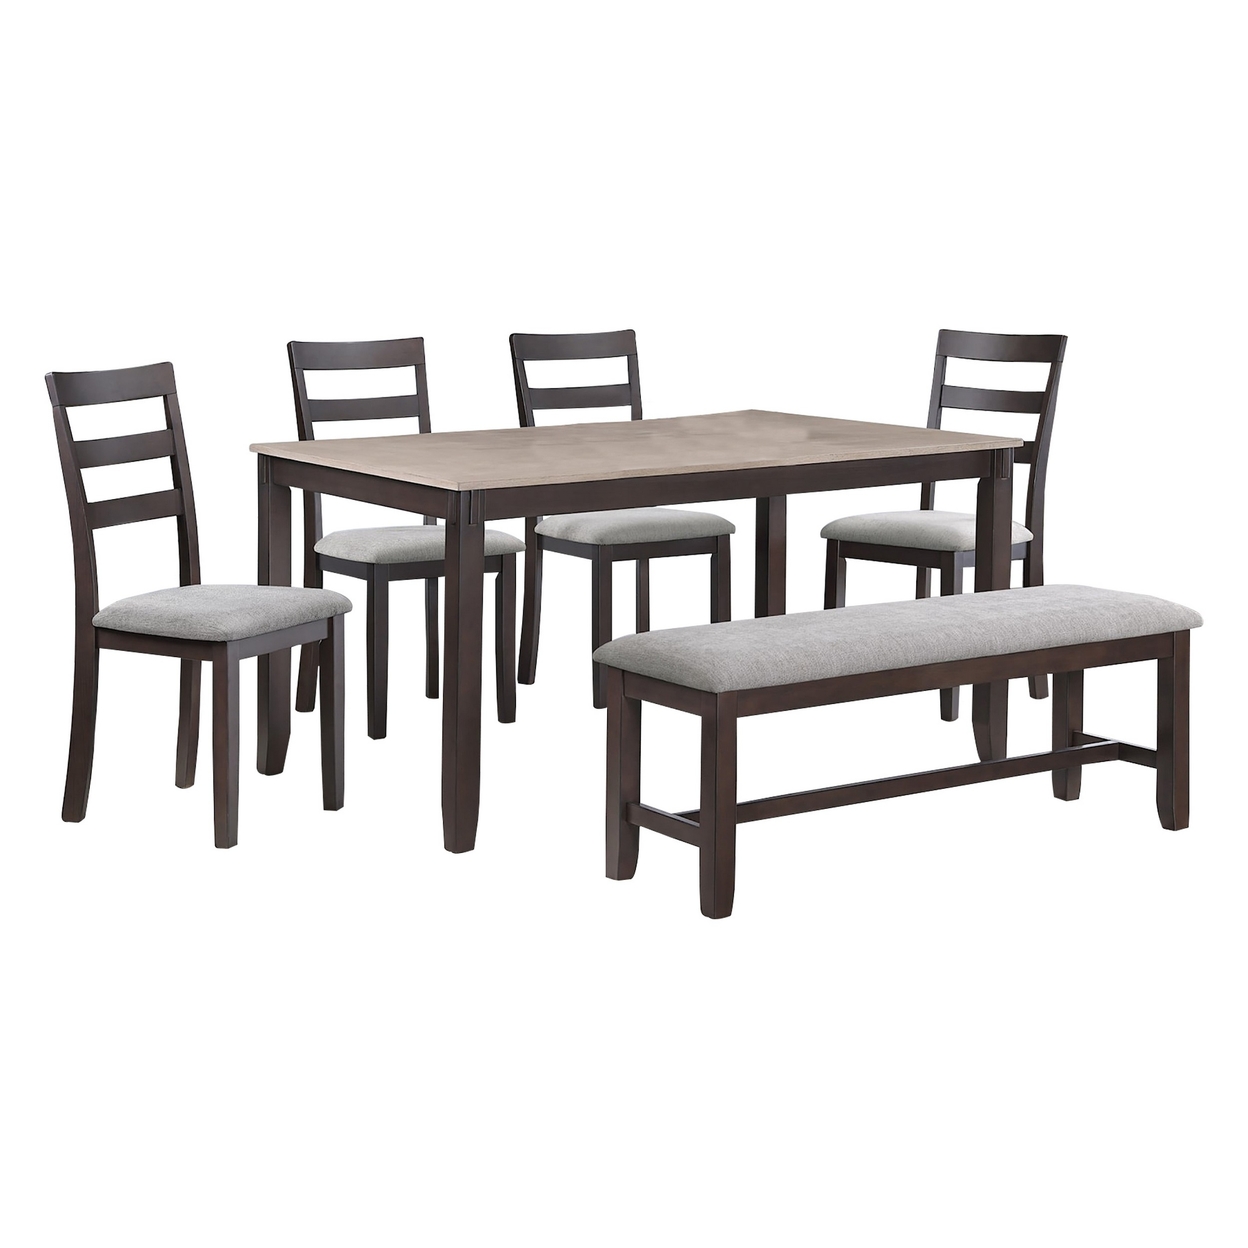 Cameron 5 Piece Dining Table And Chairs Set, Transitional Brown Wood -Saltoro Sherpi